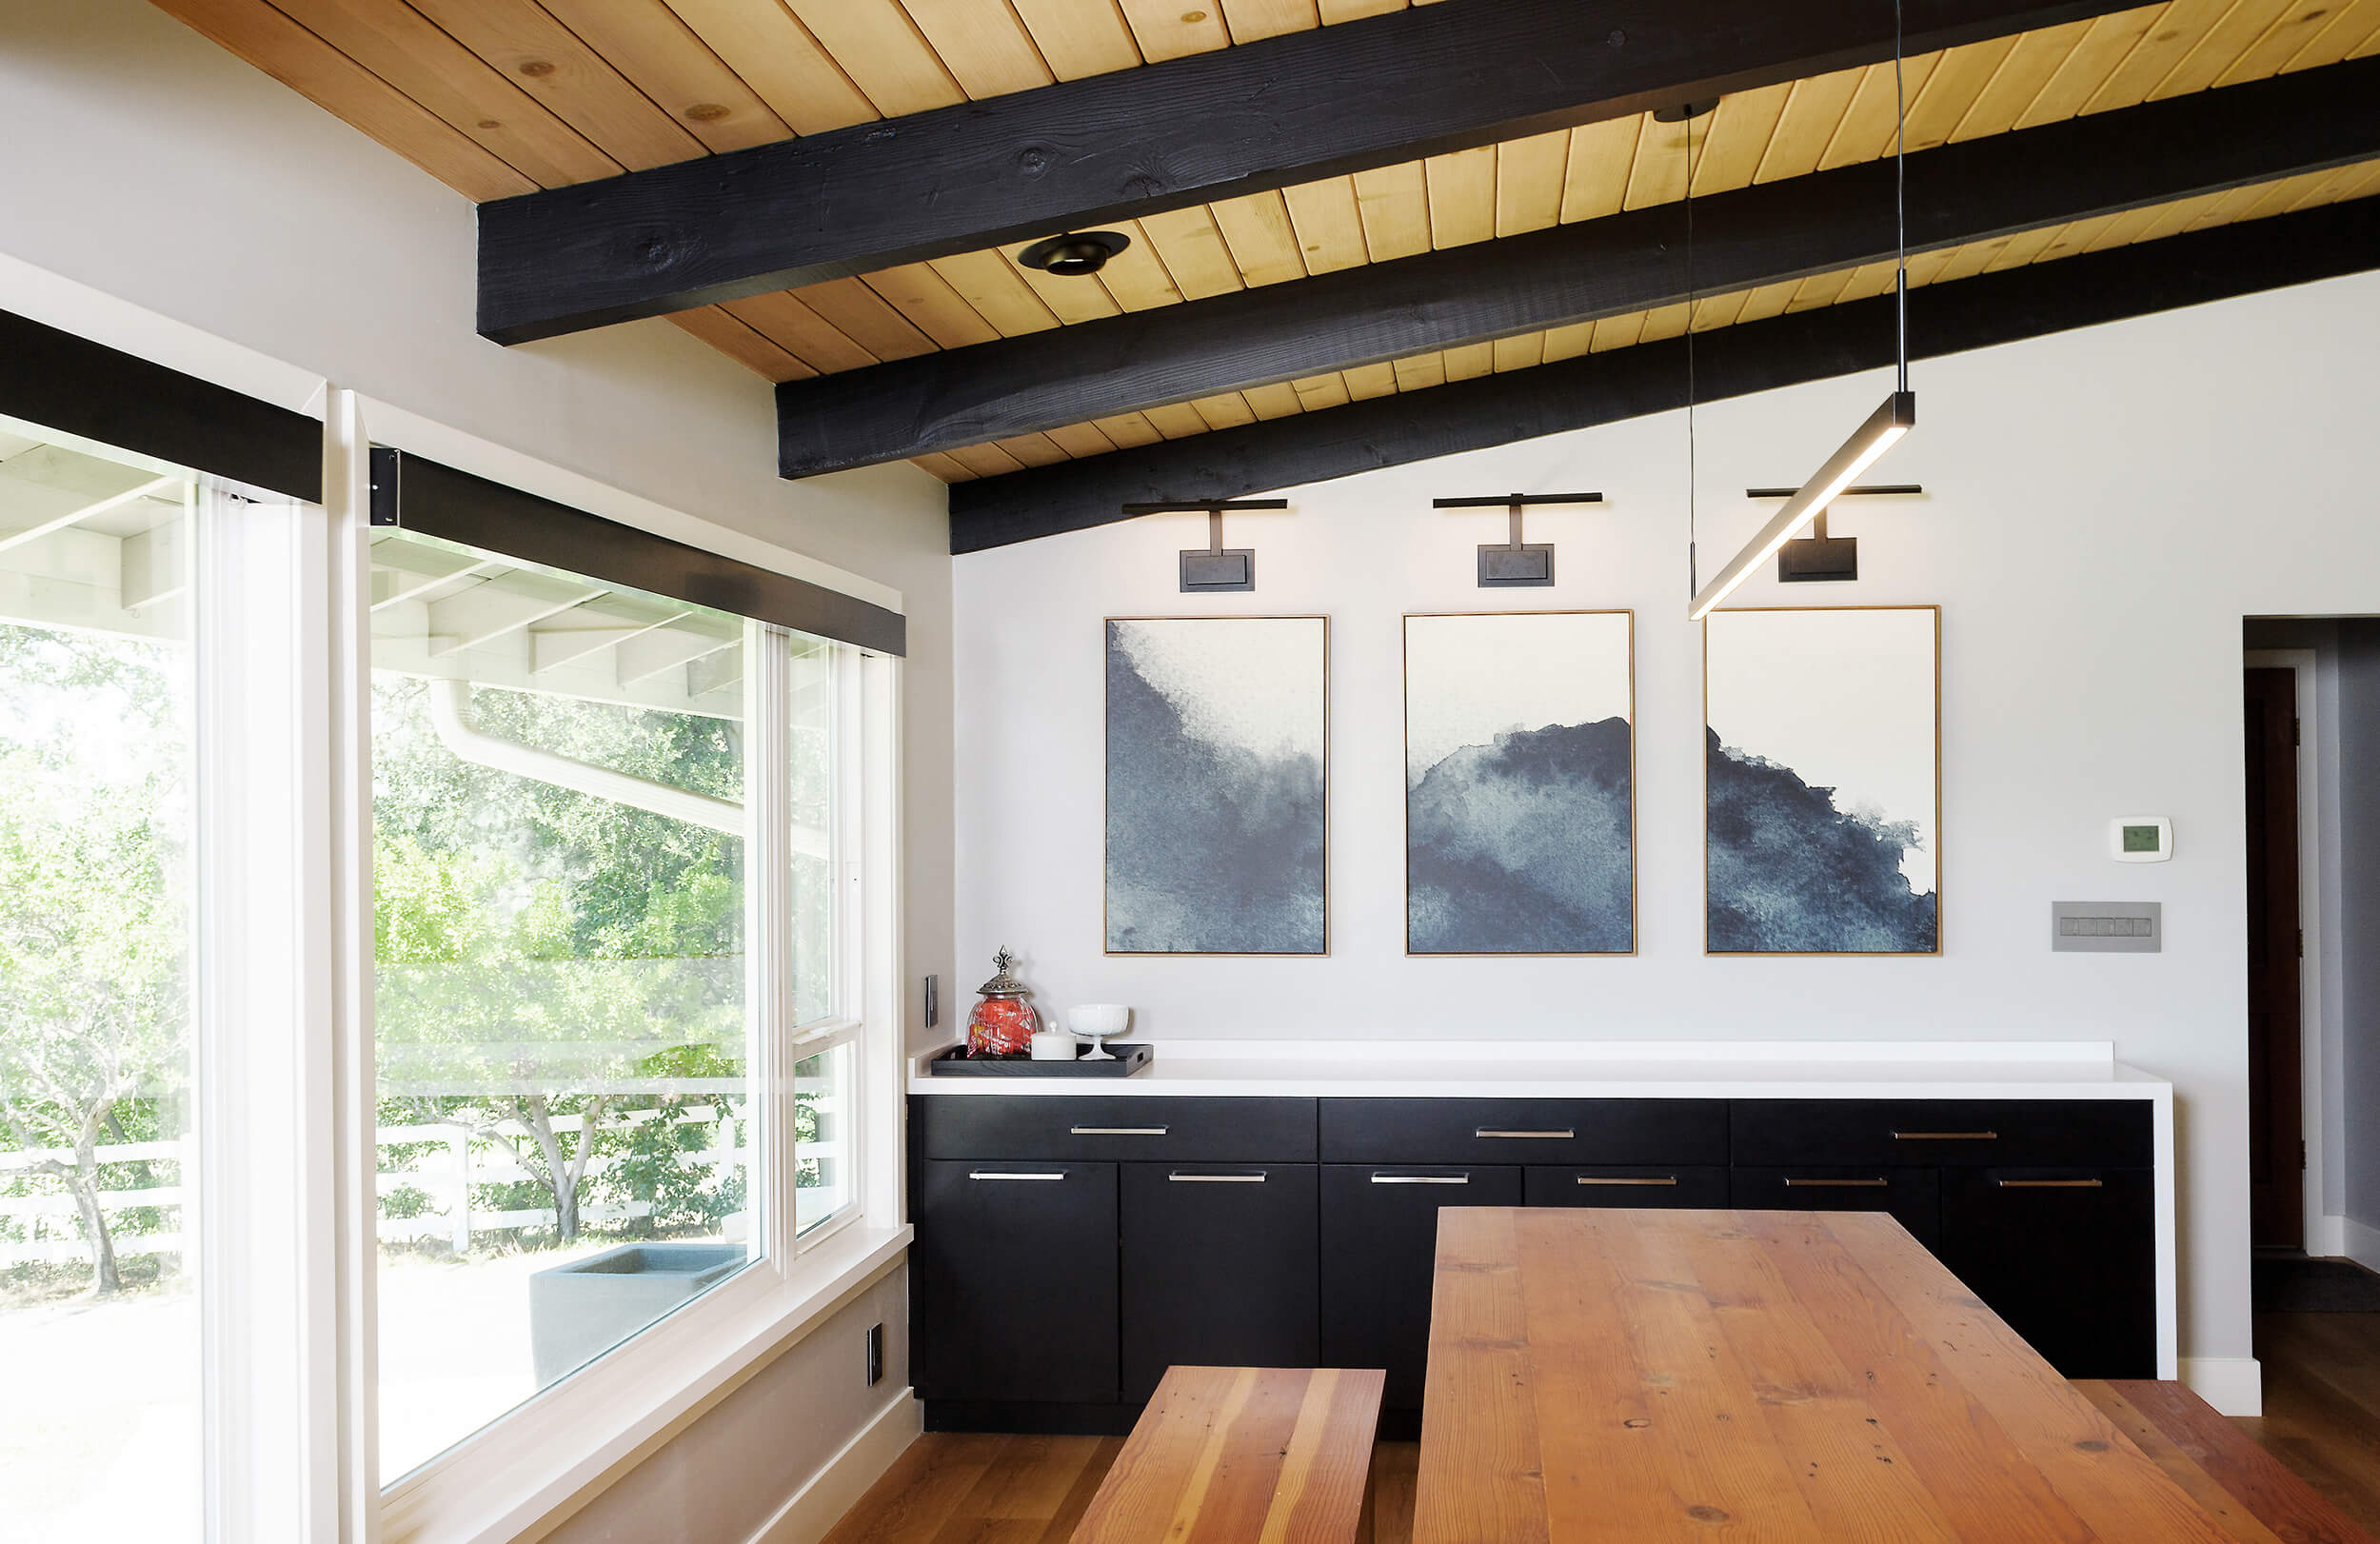 A black and white Scandinavian style kitchen and dining room with vaulted ceilings.